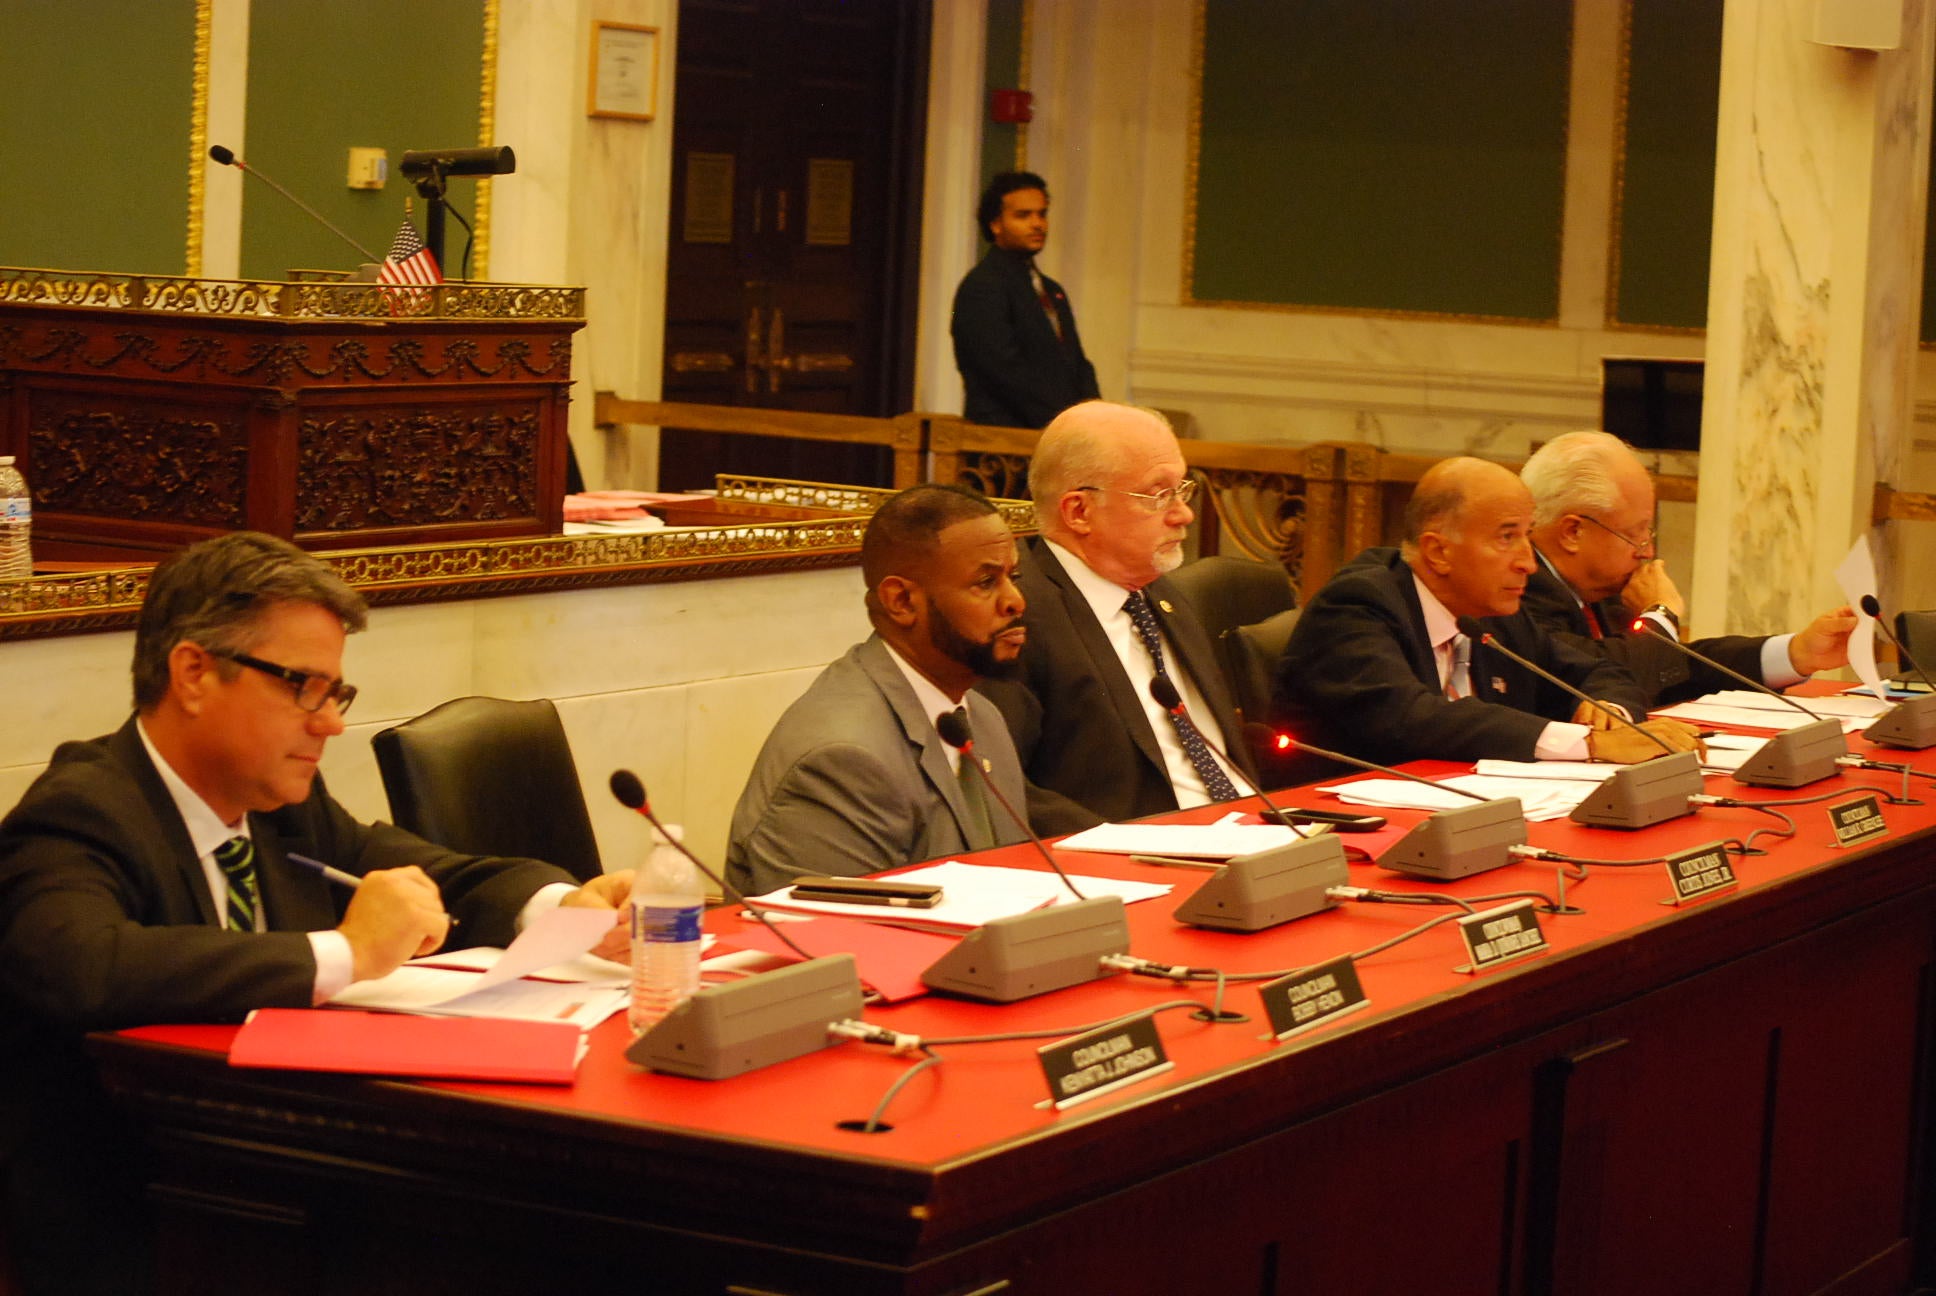 Council members listen to testimony at a Wednesday hearing on a proposal for a business improvement district in the Italian Market area.  (Tom MacDonald/WHYY)